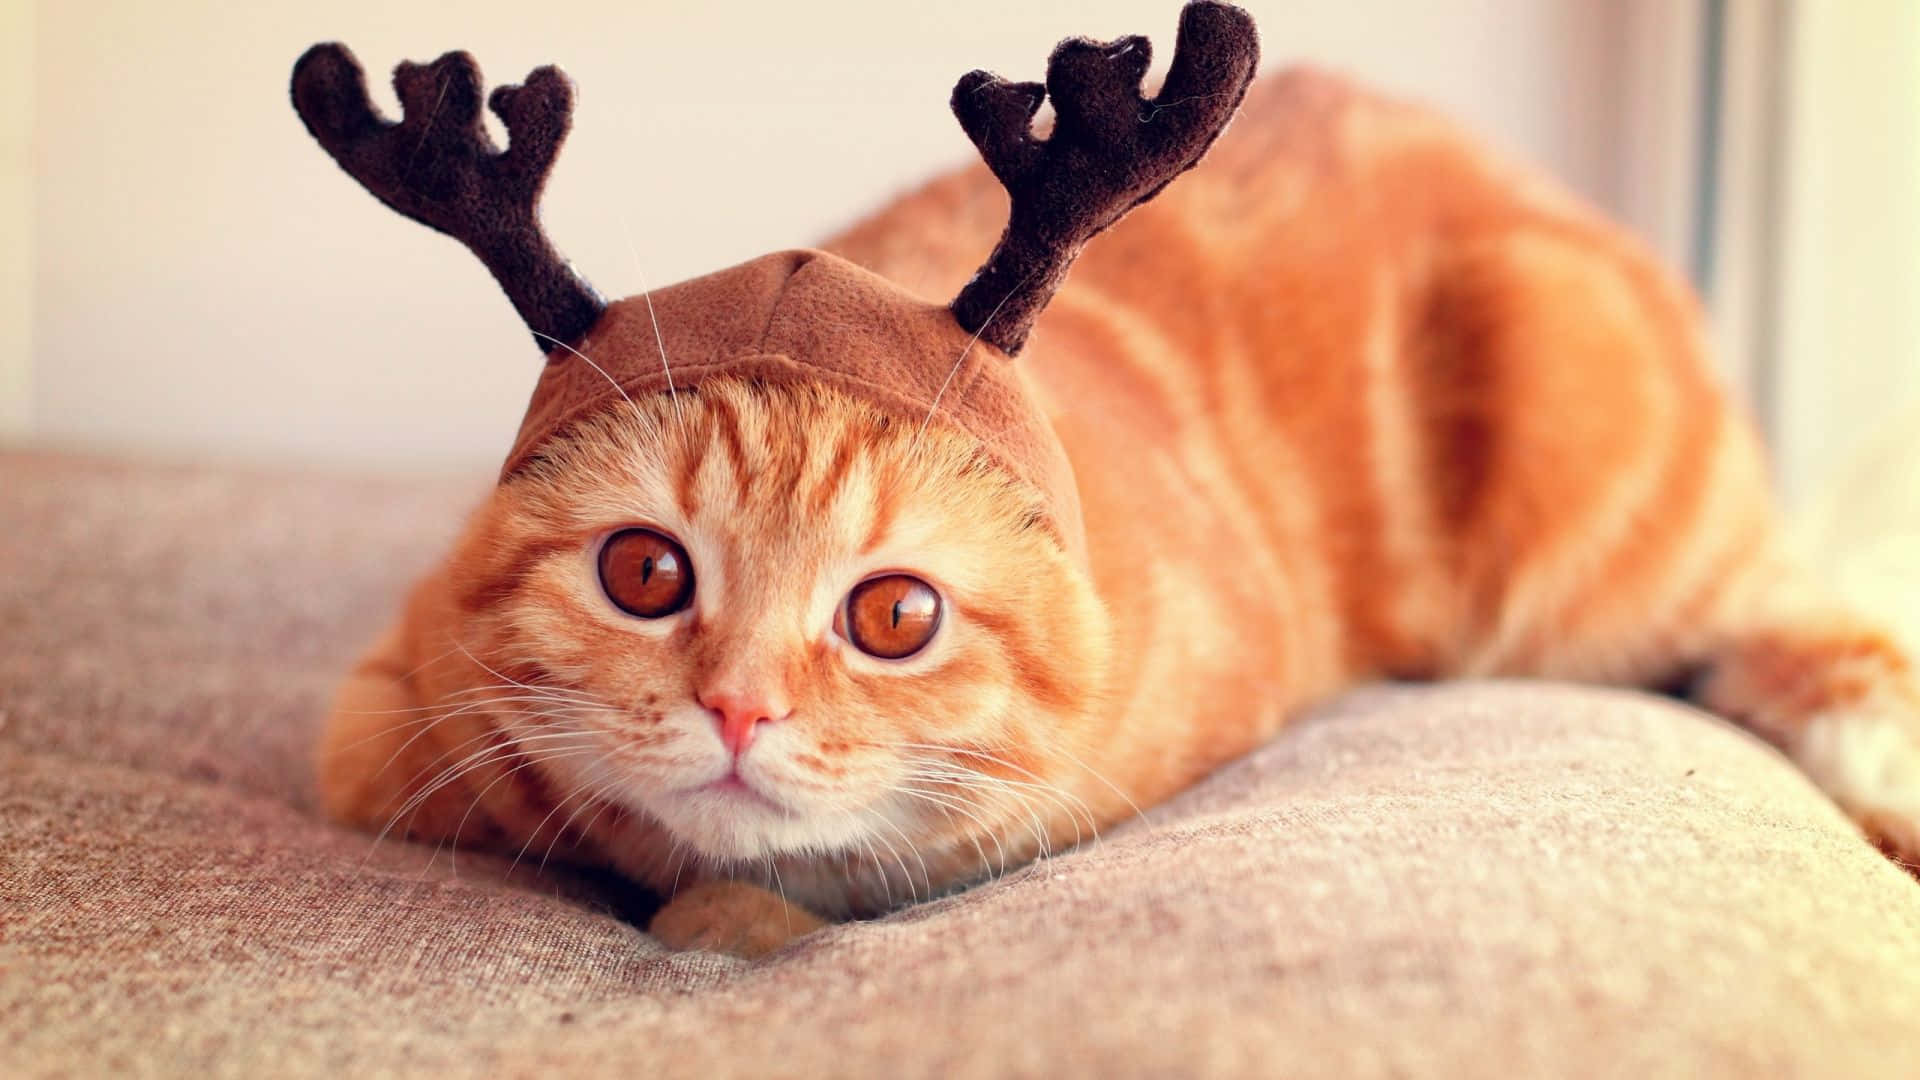 Christmas Cat Pictures 1920 X 1080 Picture